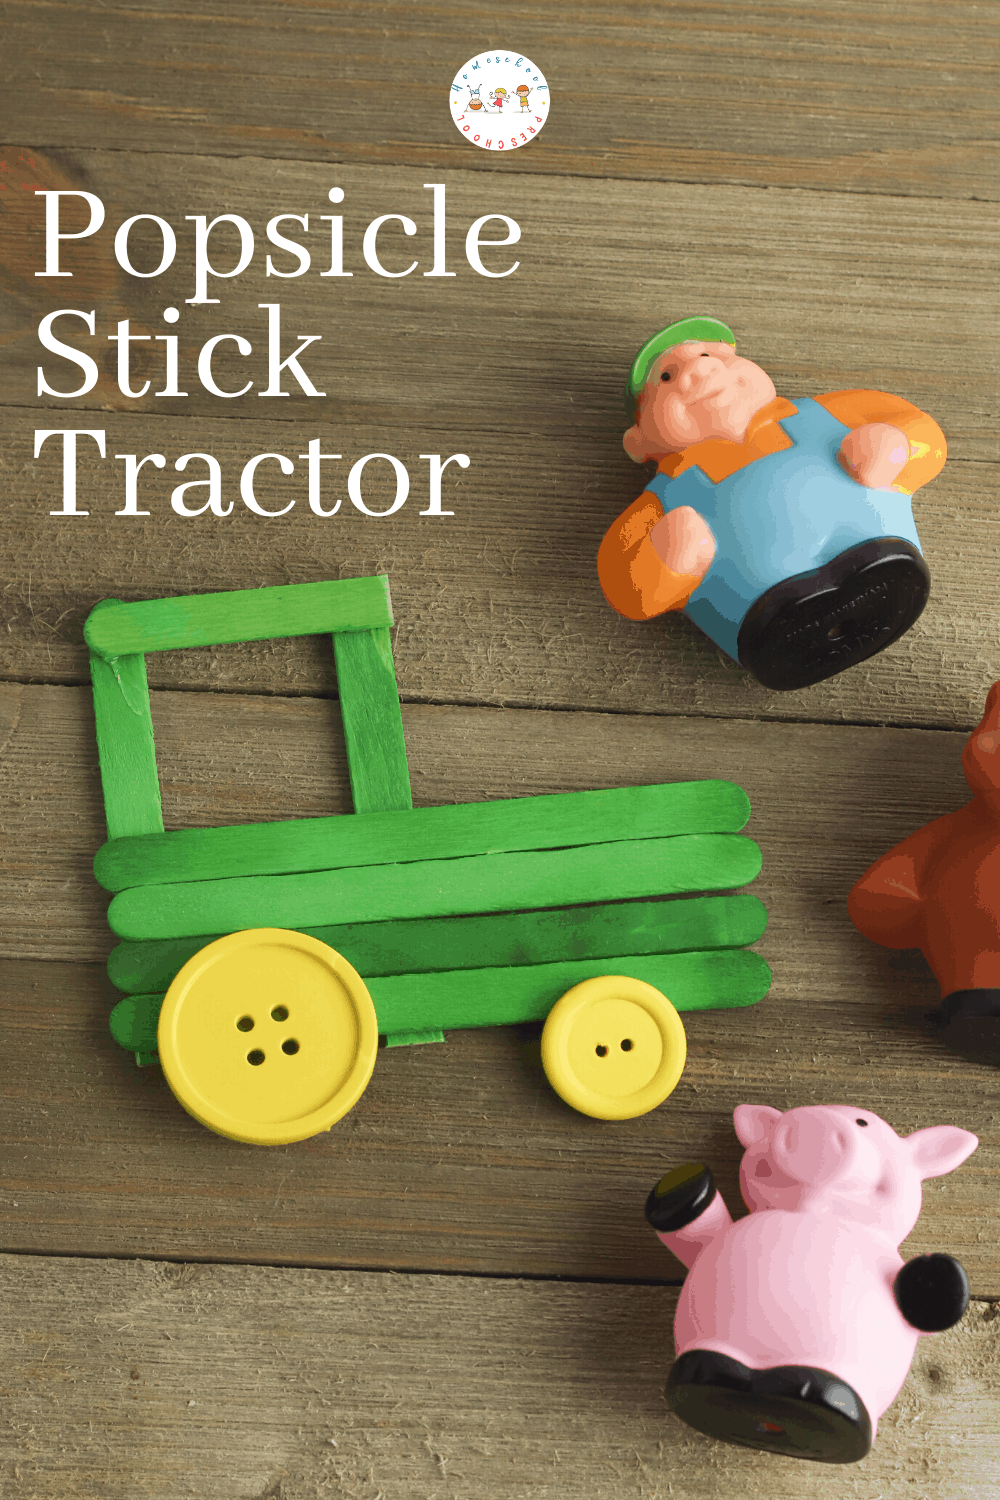 tractor-craft-1 Printable Crafts for Kids